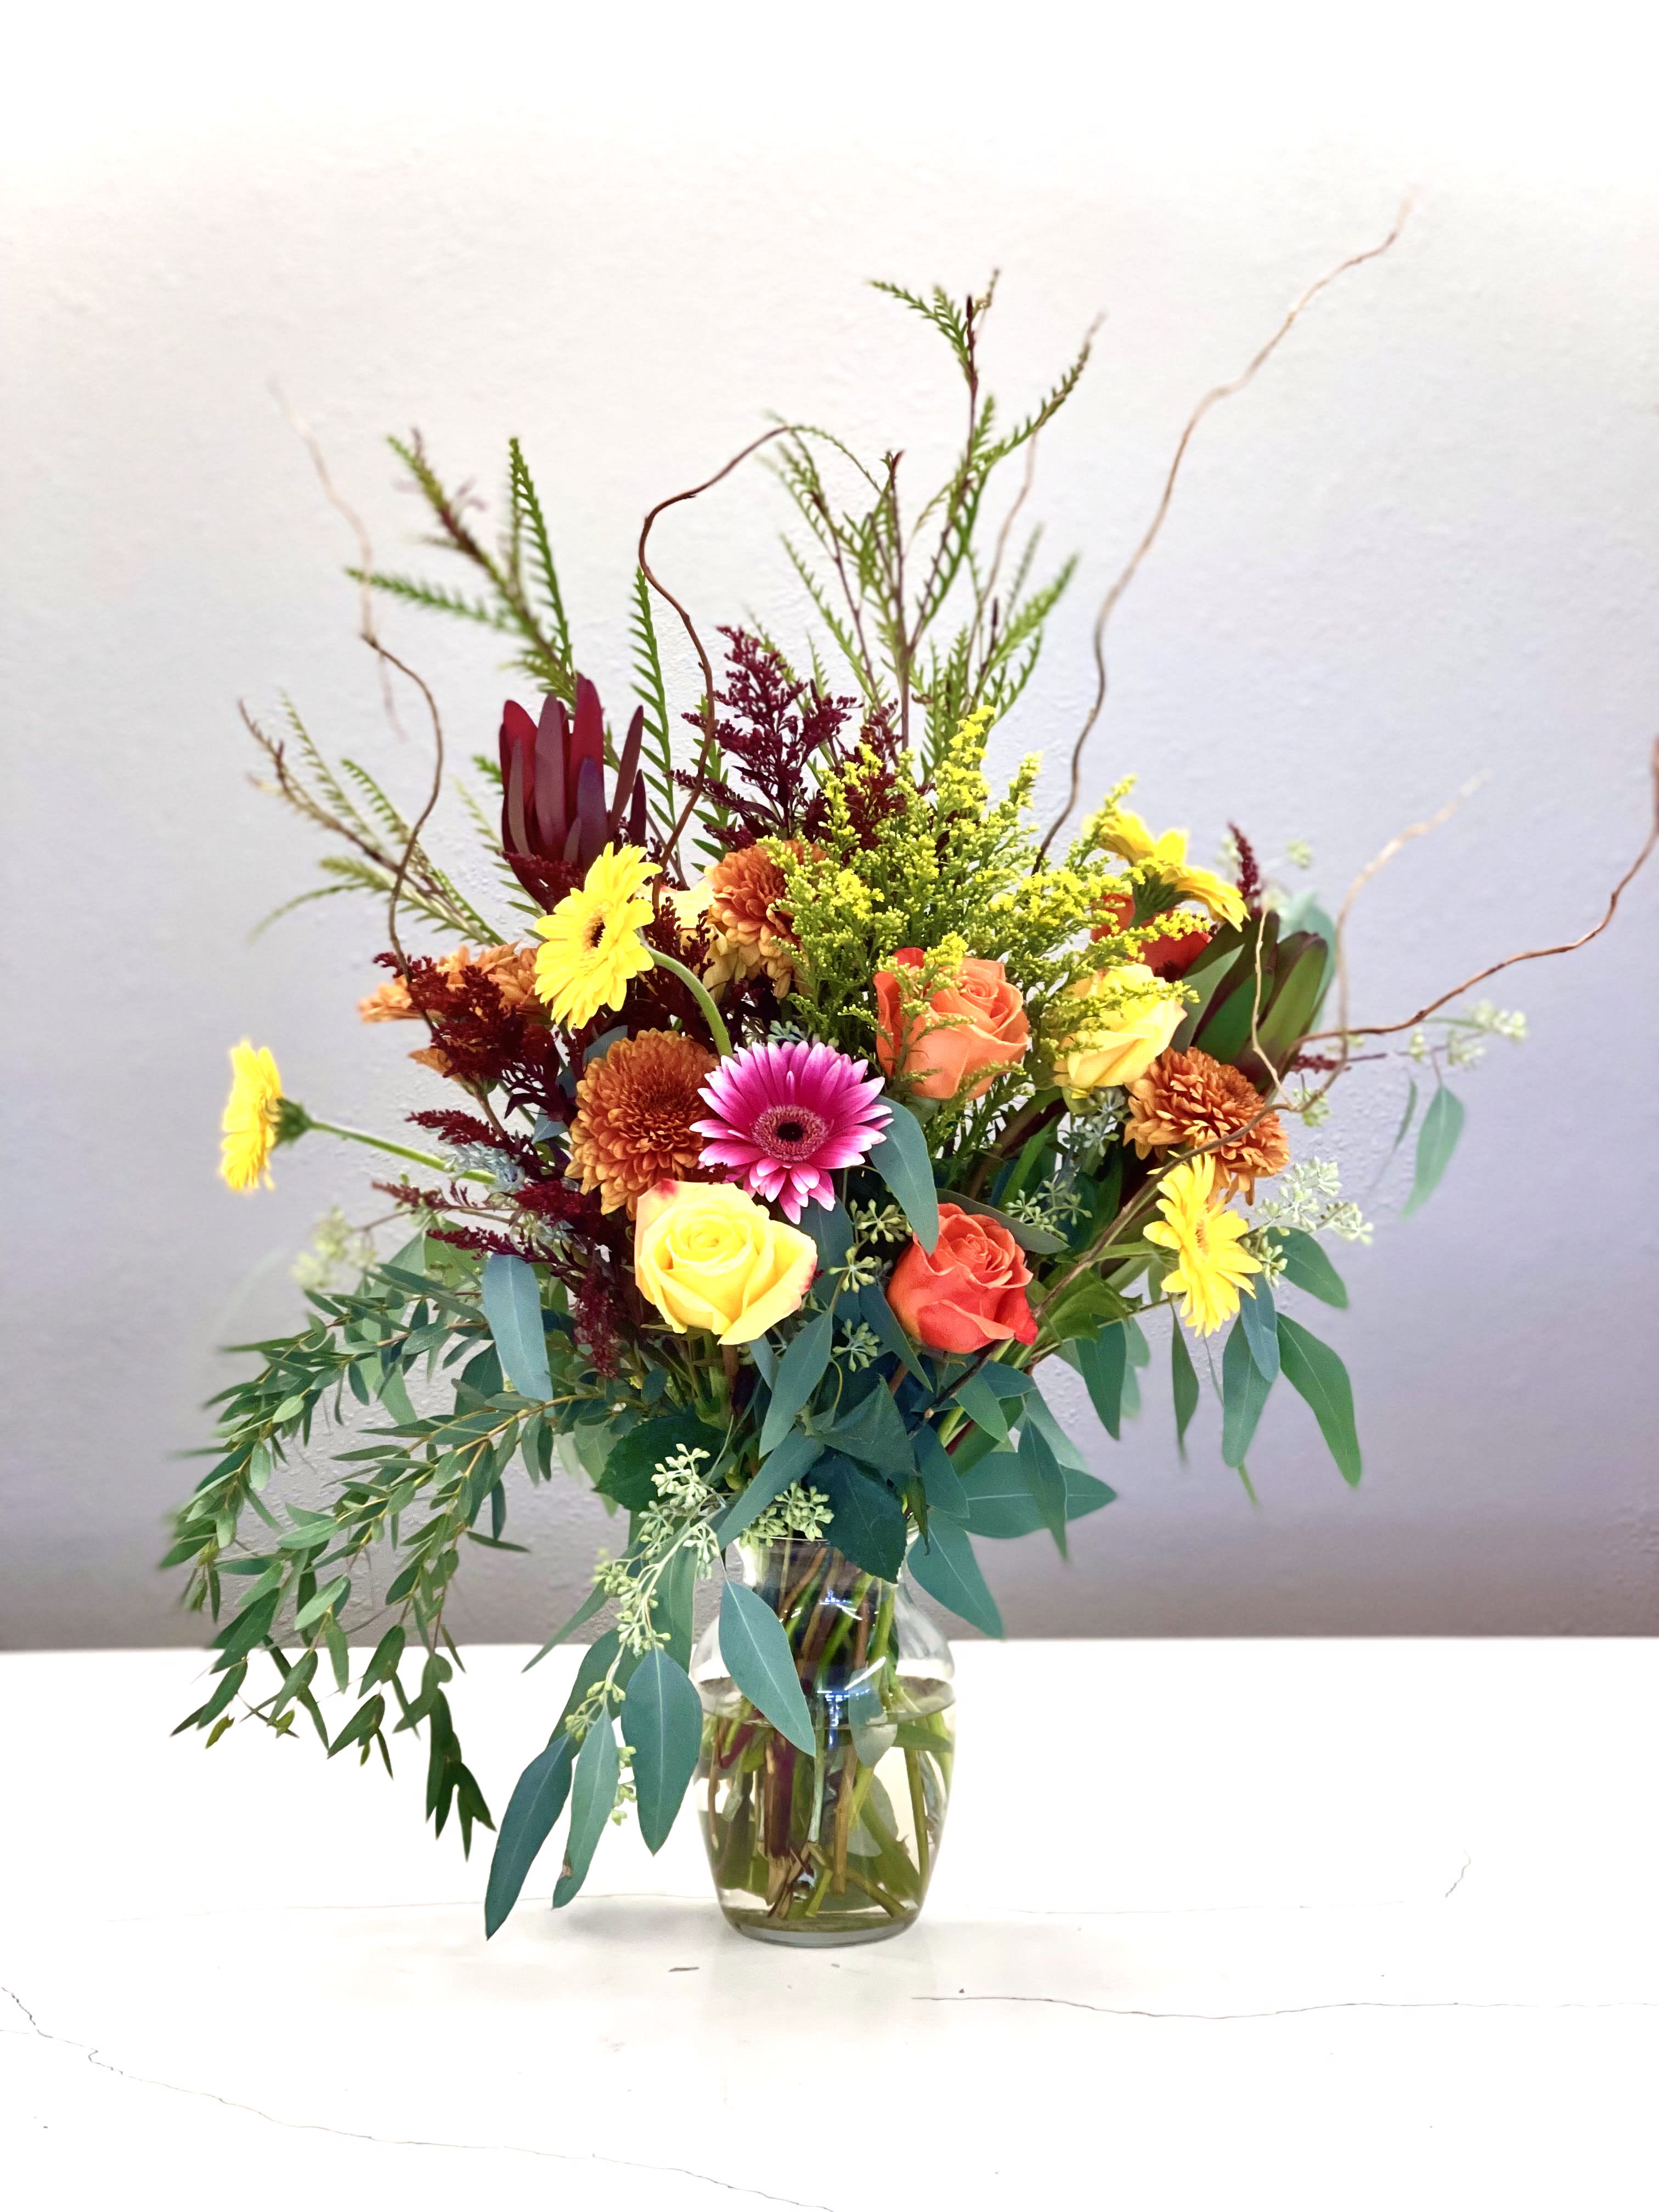 Felicity - Let them know you are thinking of them with a beautiful bouquet. 